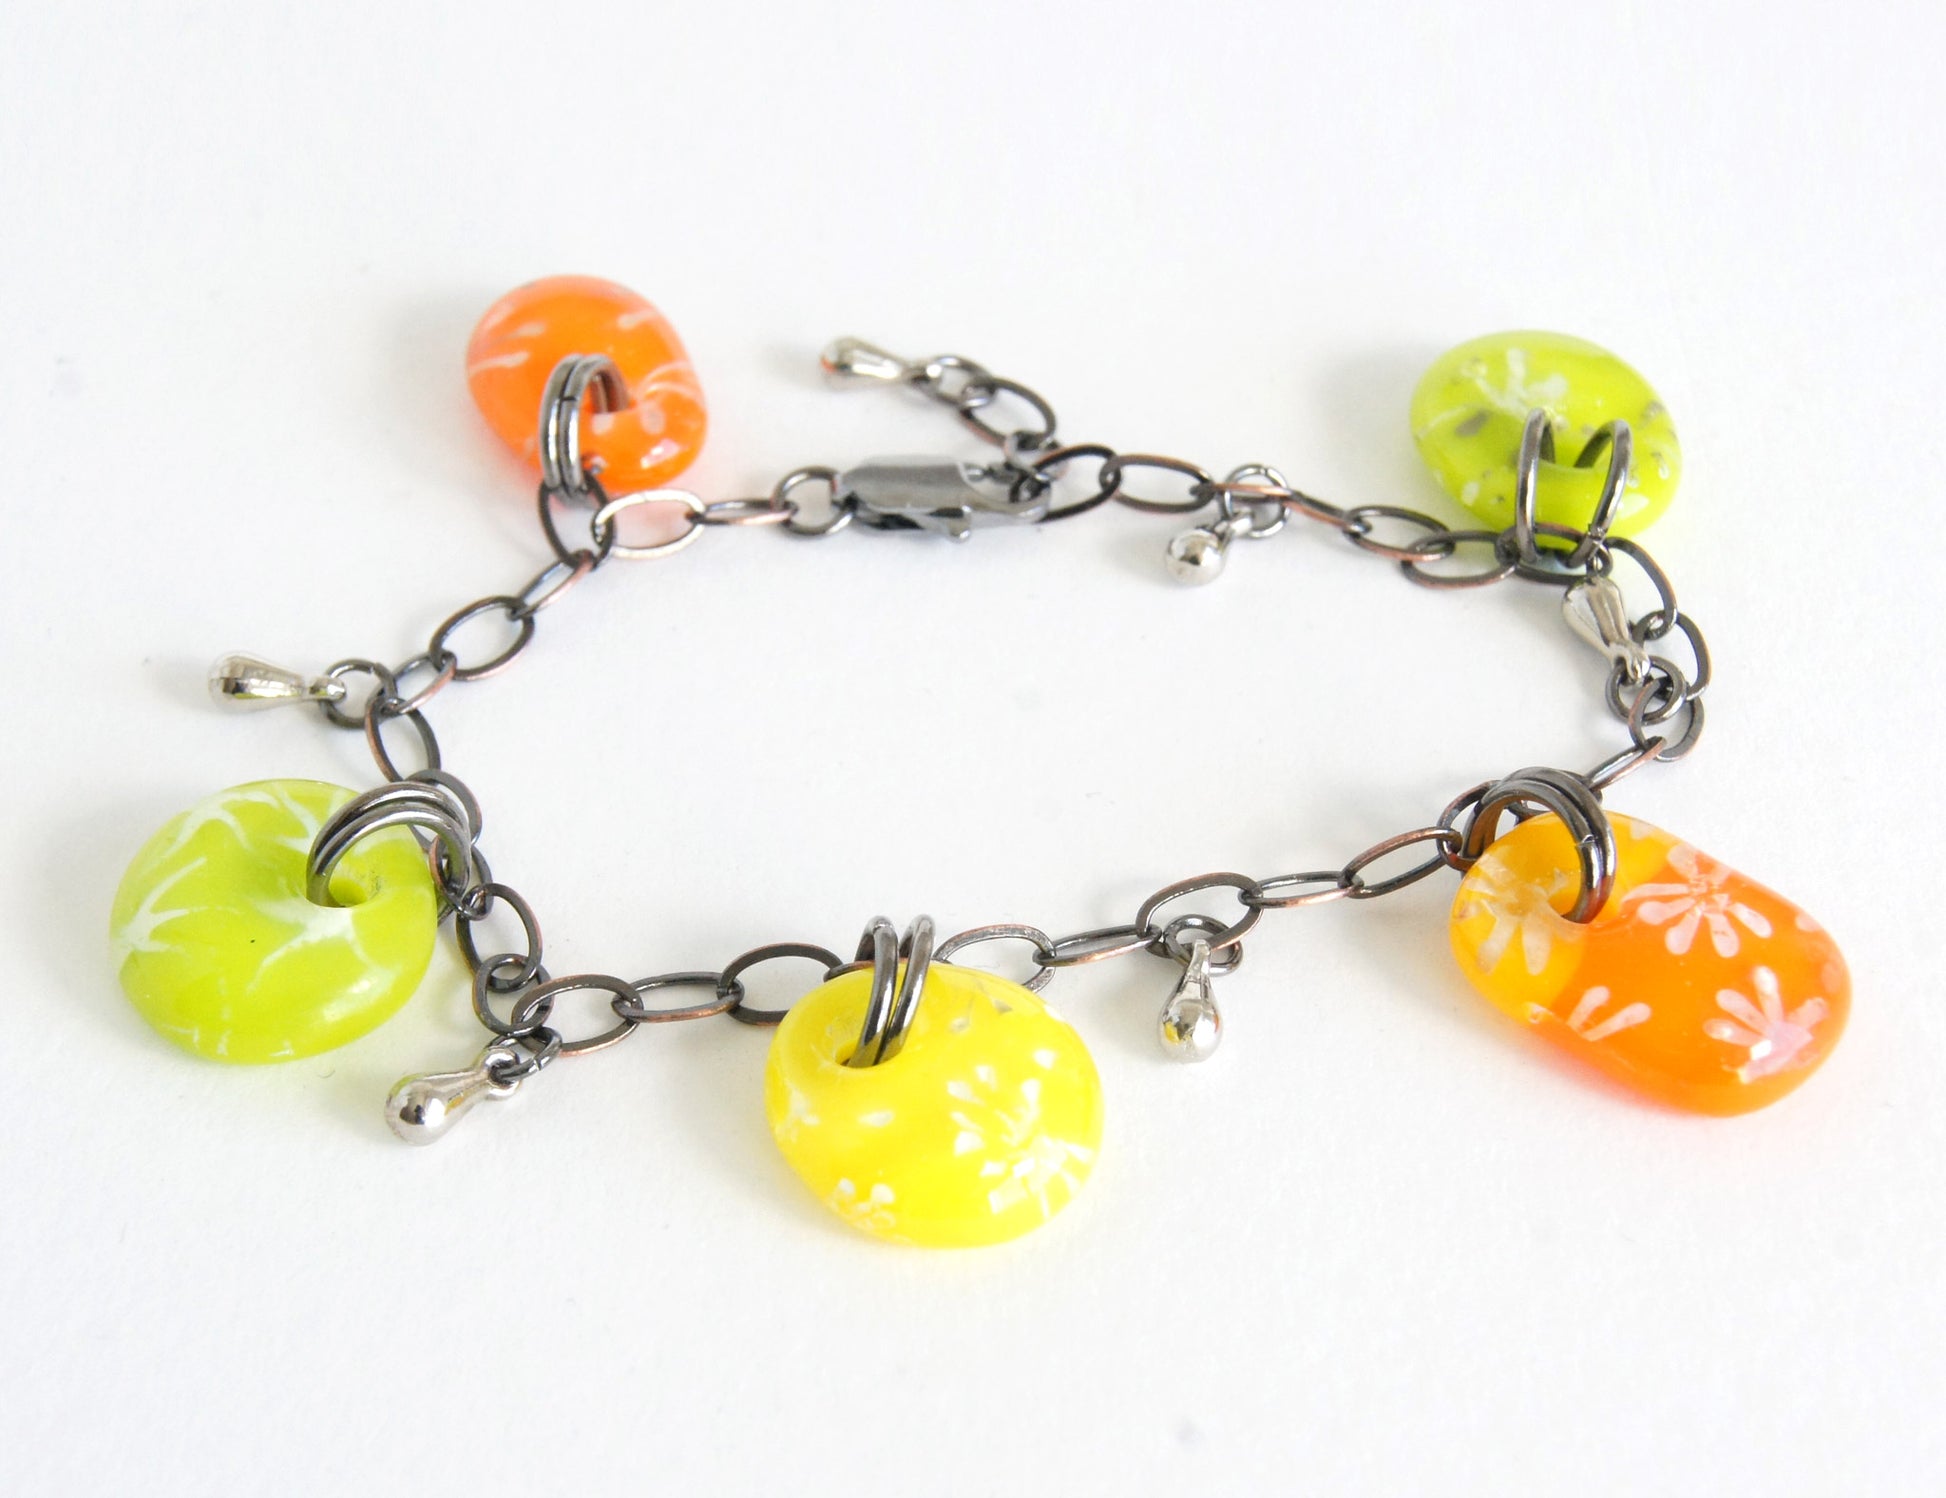 Colorful kiln fired glass drop bracelet with silver stars and flower designs